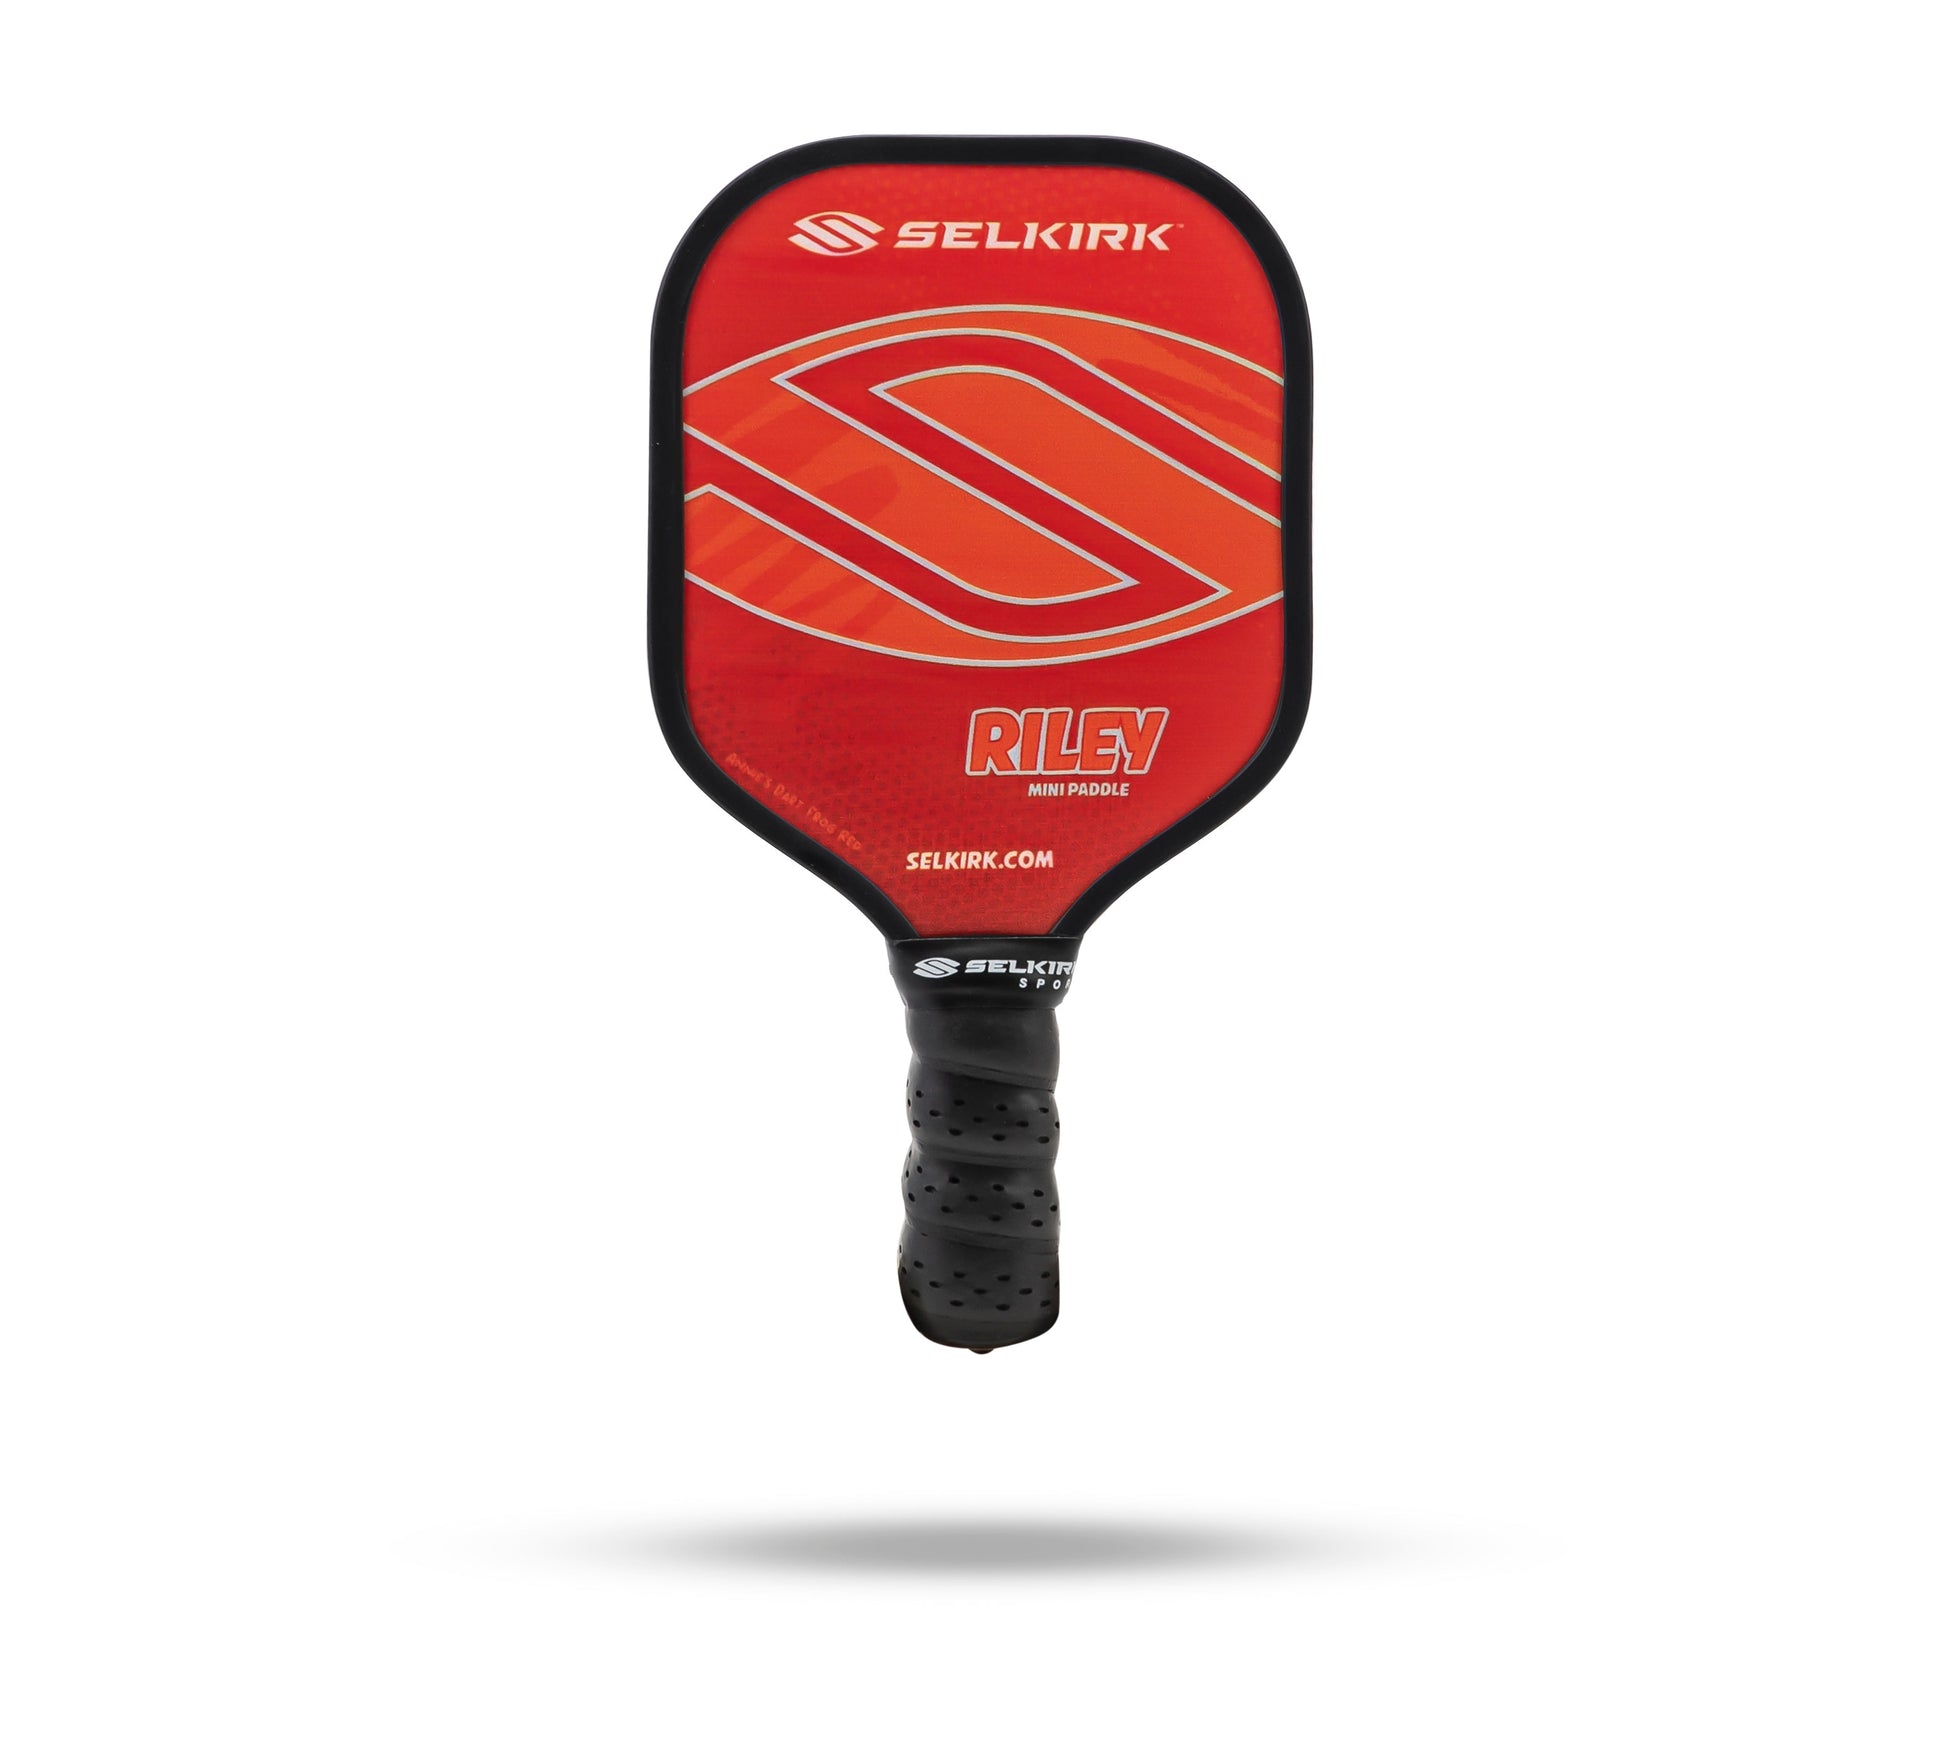 Adding a fresh look to your game, the Selkirk Riley Mini Pickleball Paddle Collection presents a striking red and black paddle on a clean white background. Perfect as a novelty gift.